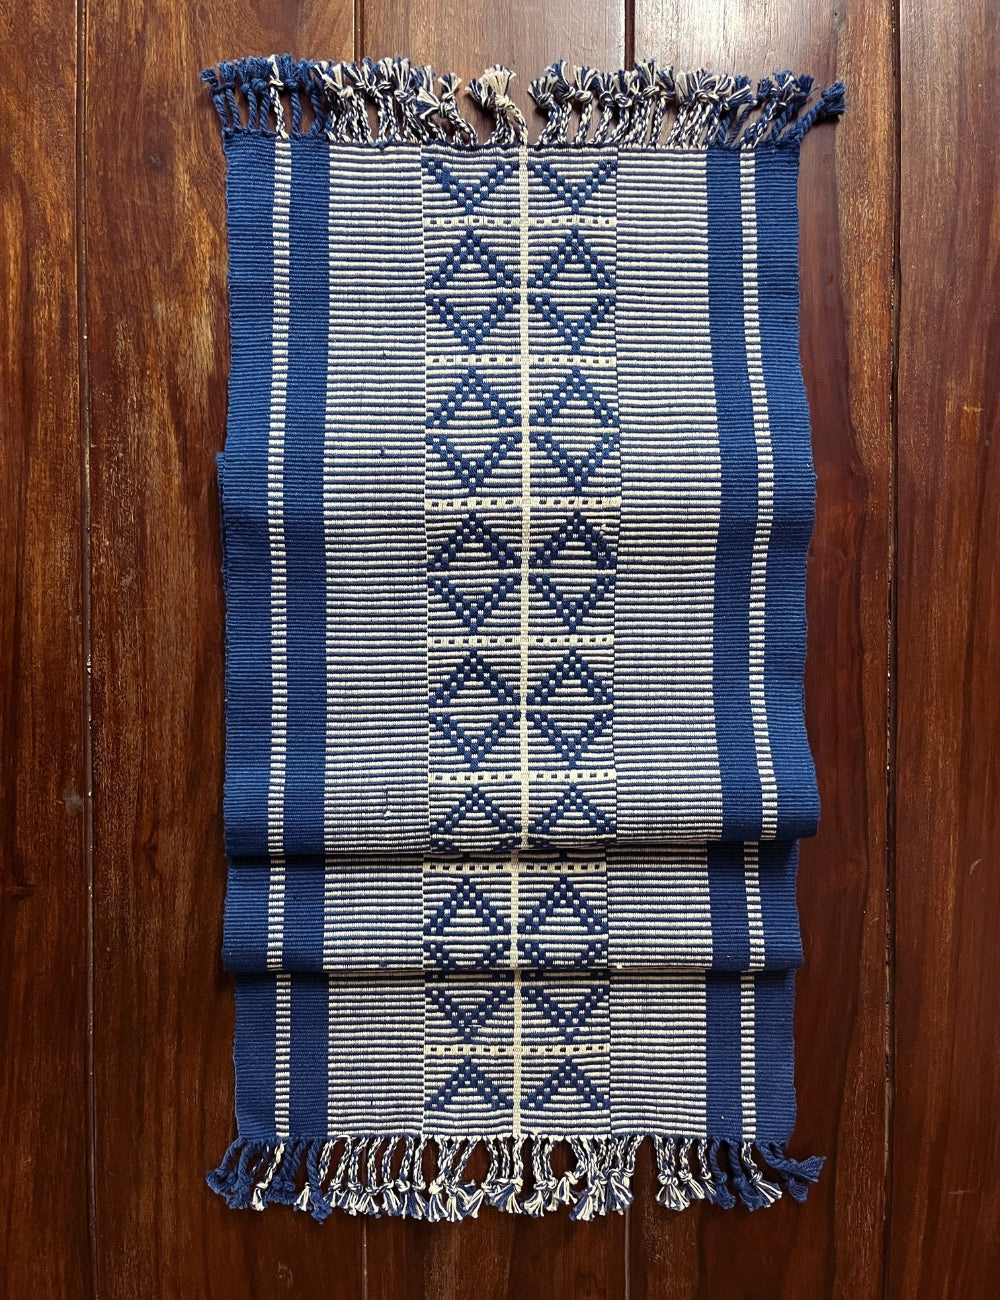 Chizami Weaves - Loin Loom Handwoven Table Runner in Blue & White